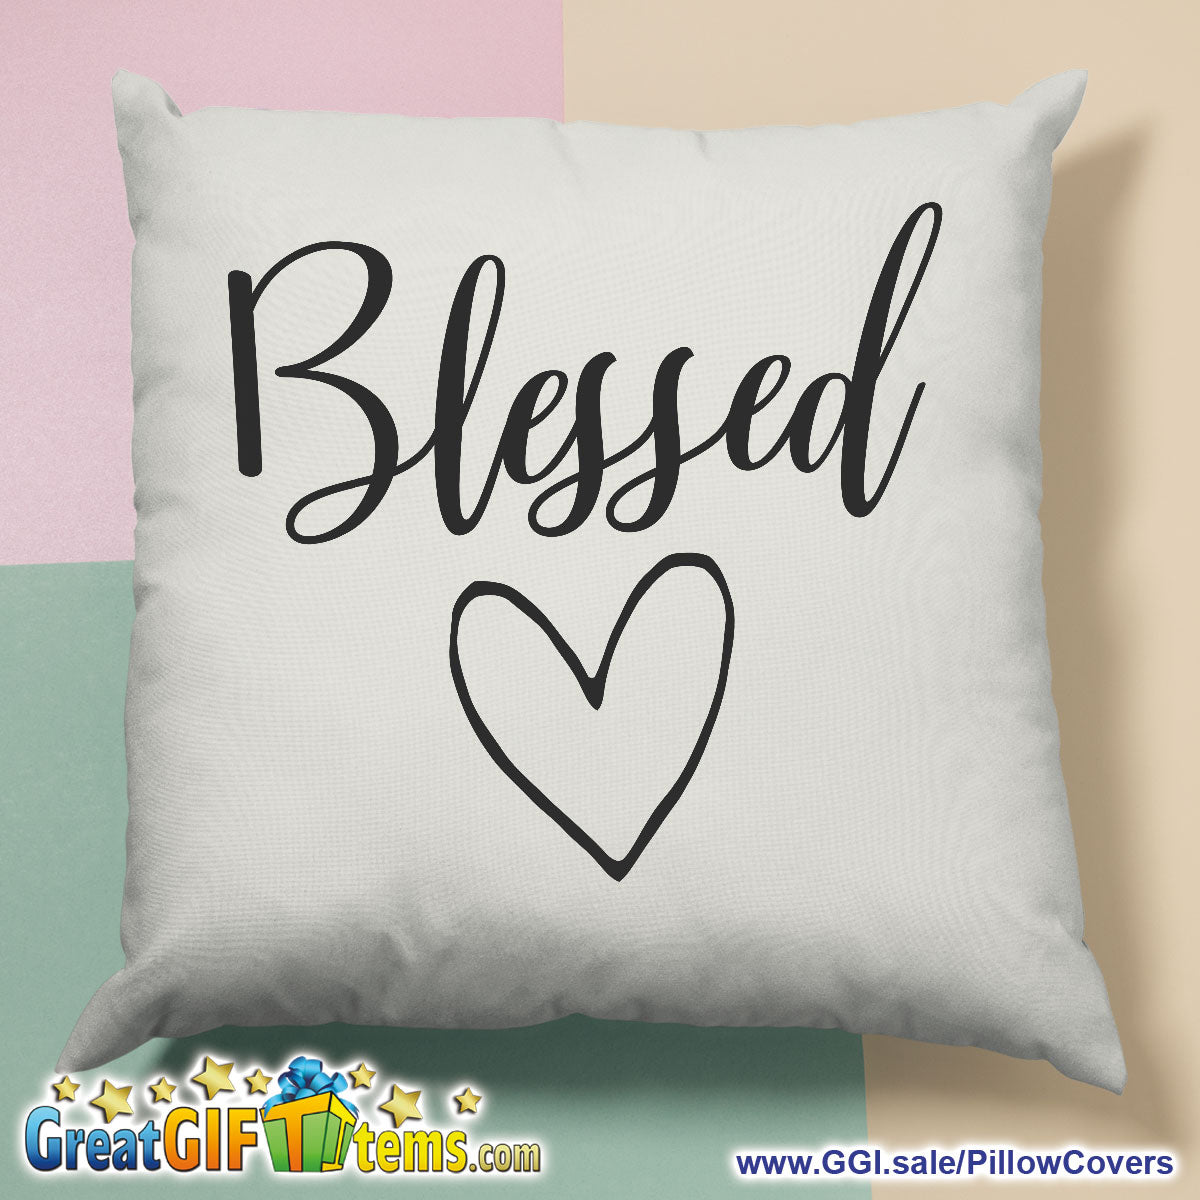 blessed throw pillows